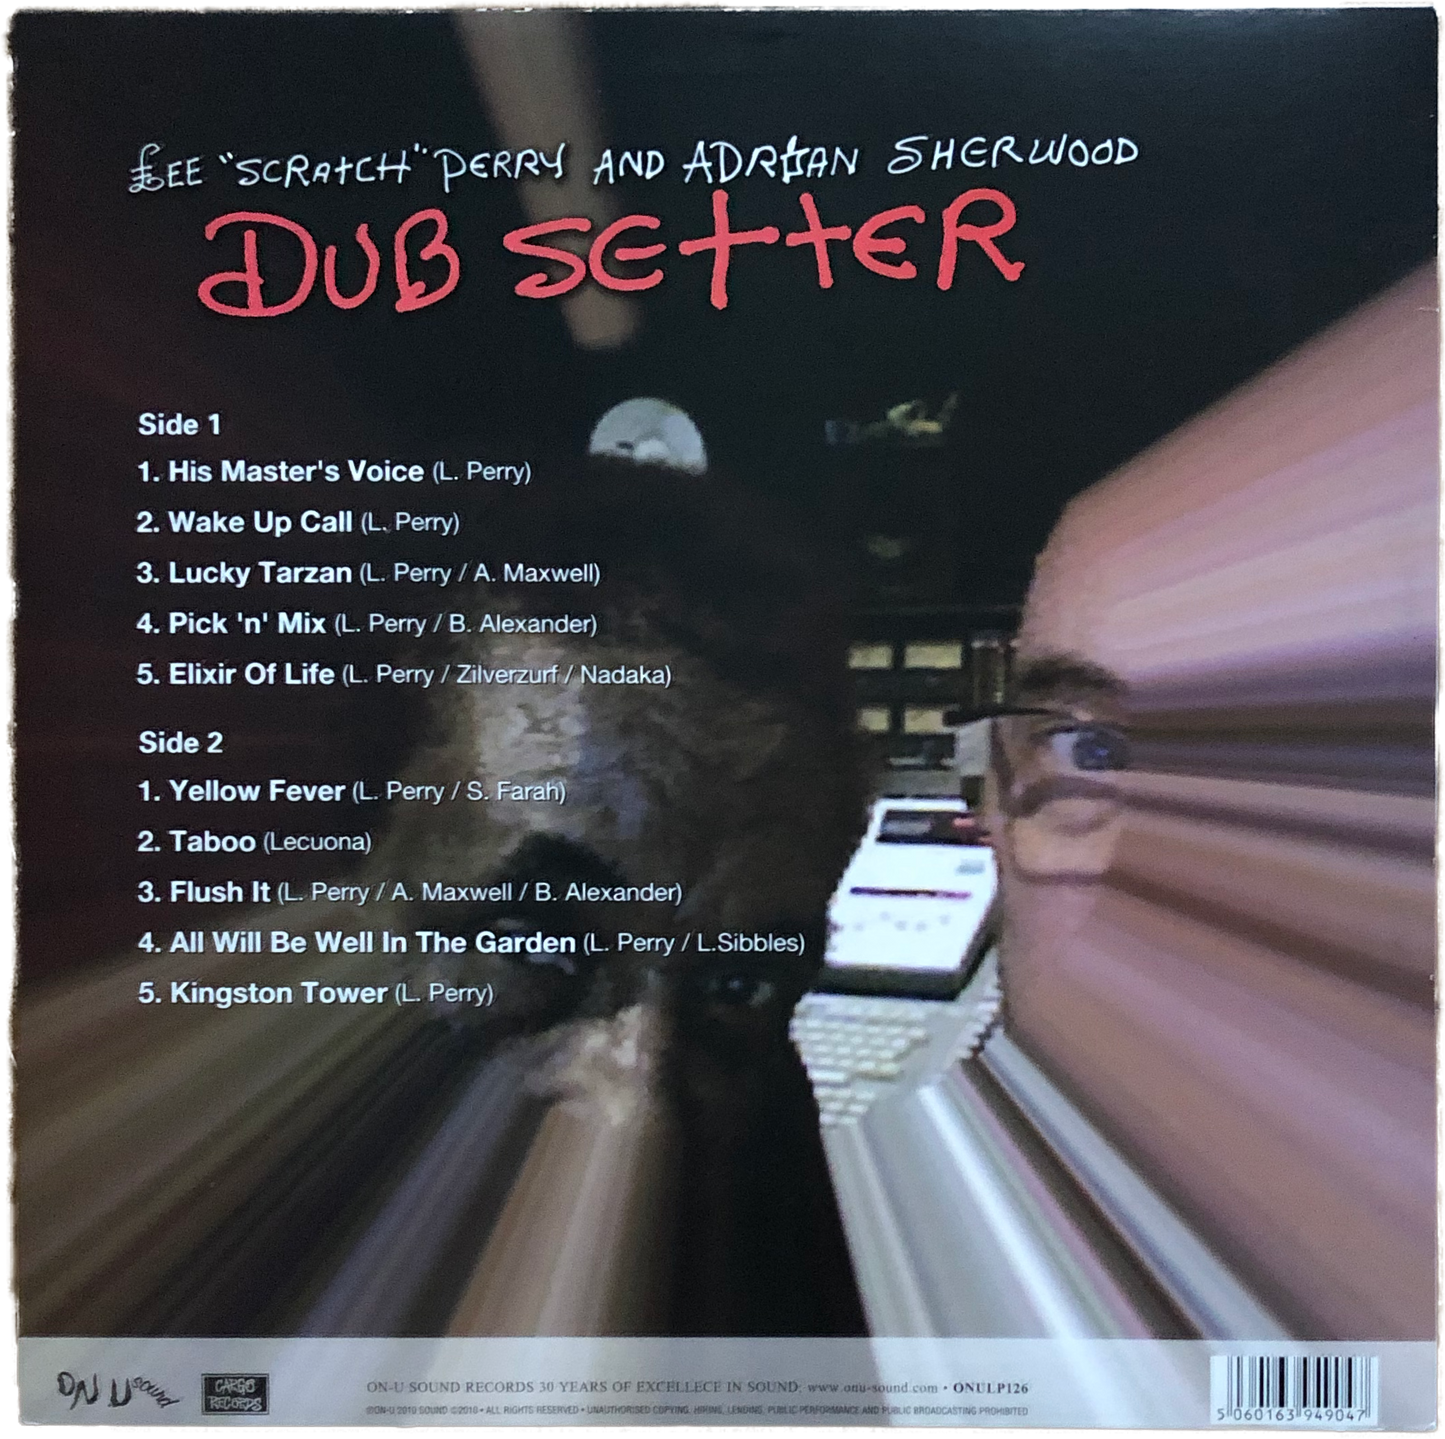 【Used】Lee "Scratch" Perry & Adrian Sherwood / Dub Setter